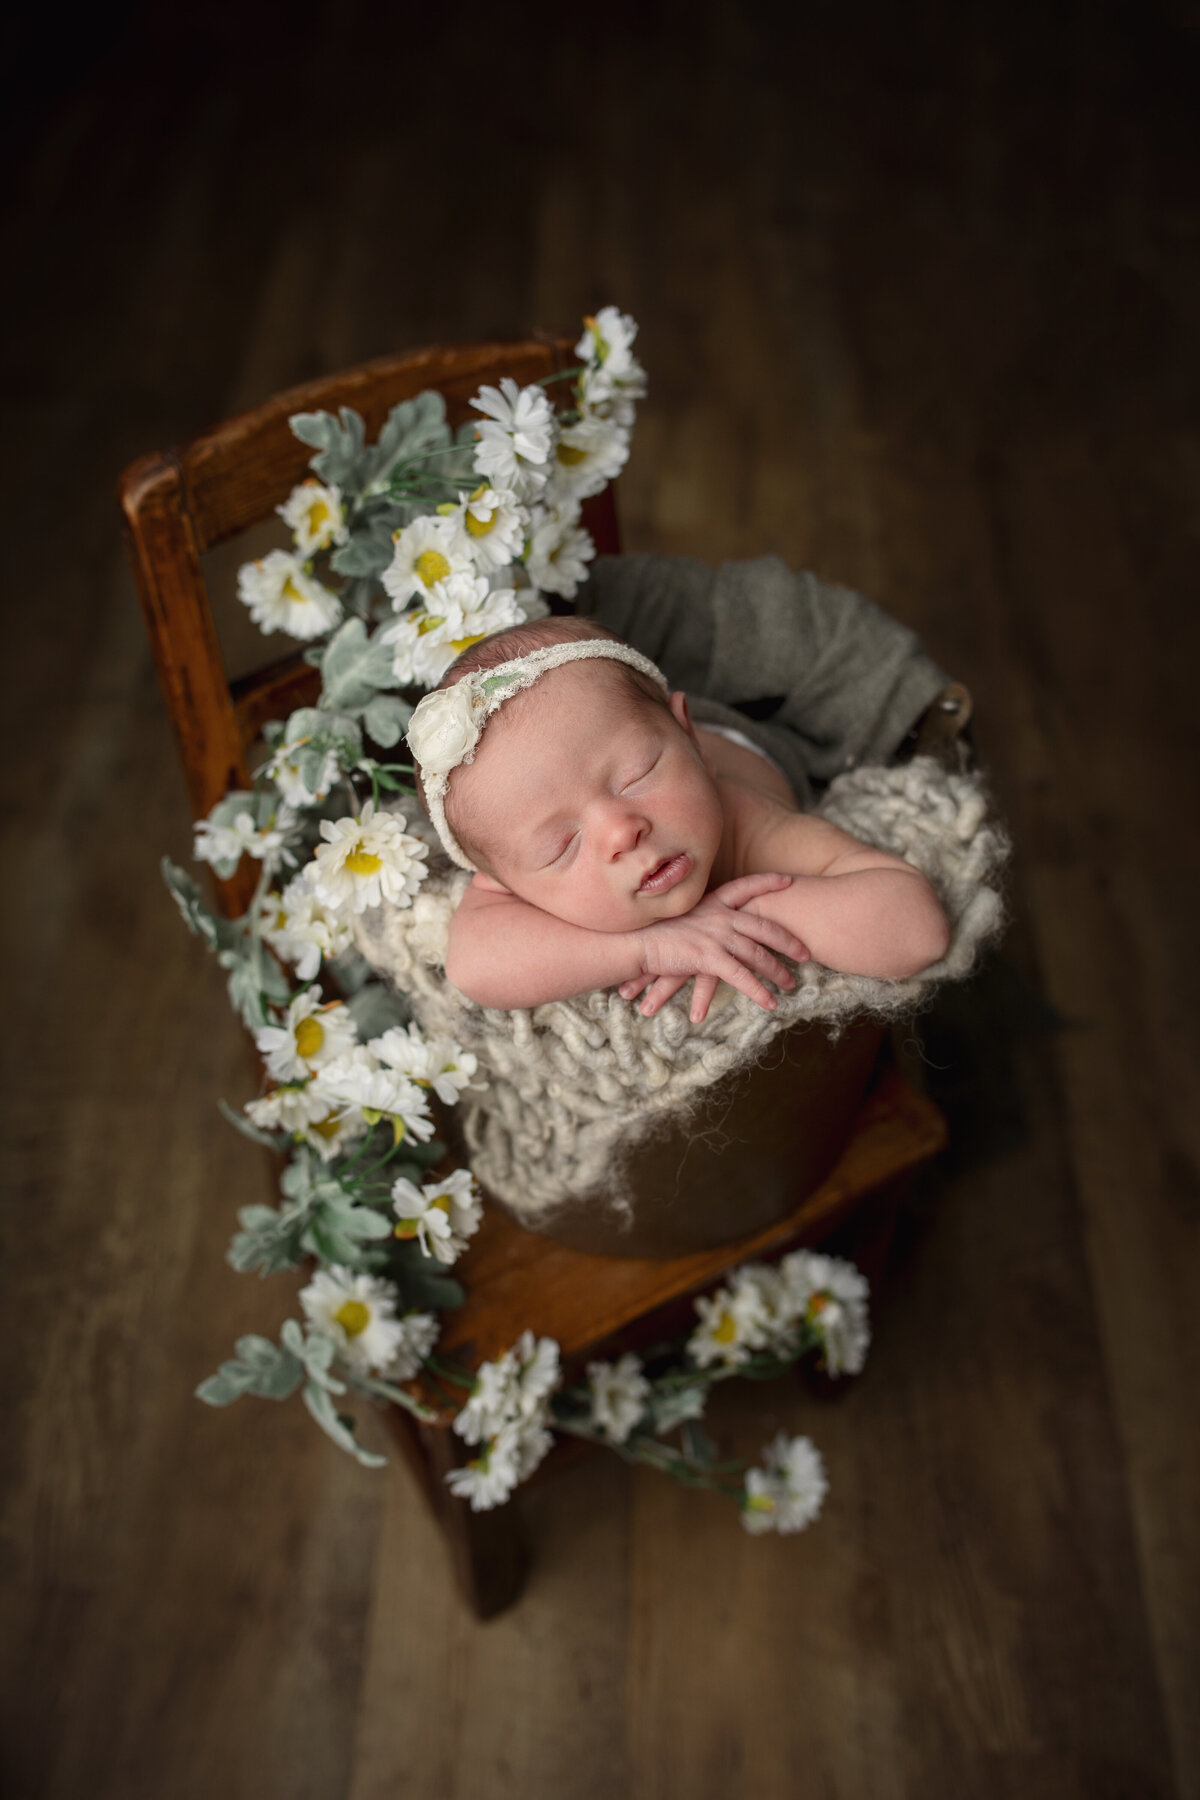 Newborn baby girl  posed in a bucket with flowers around her